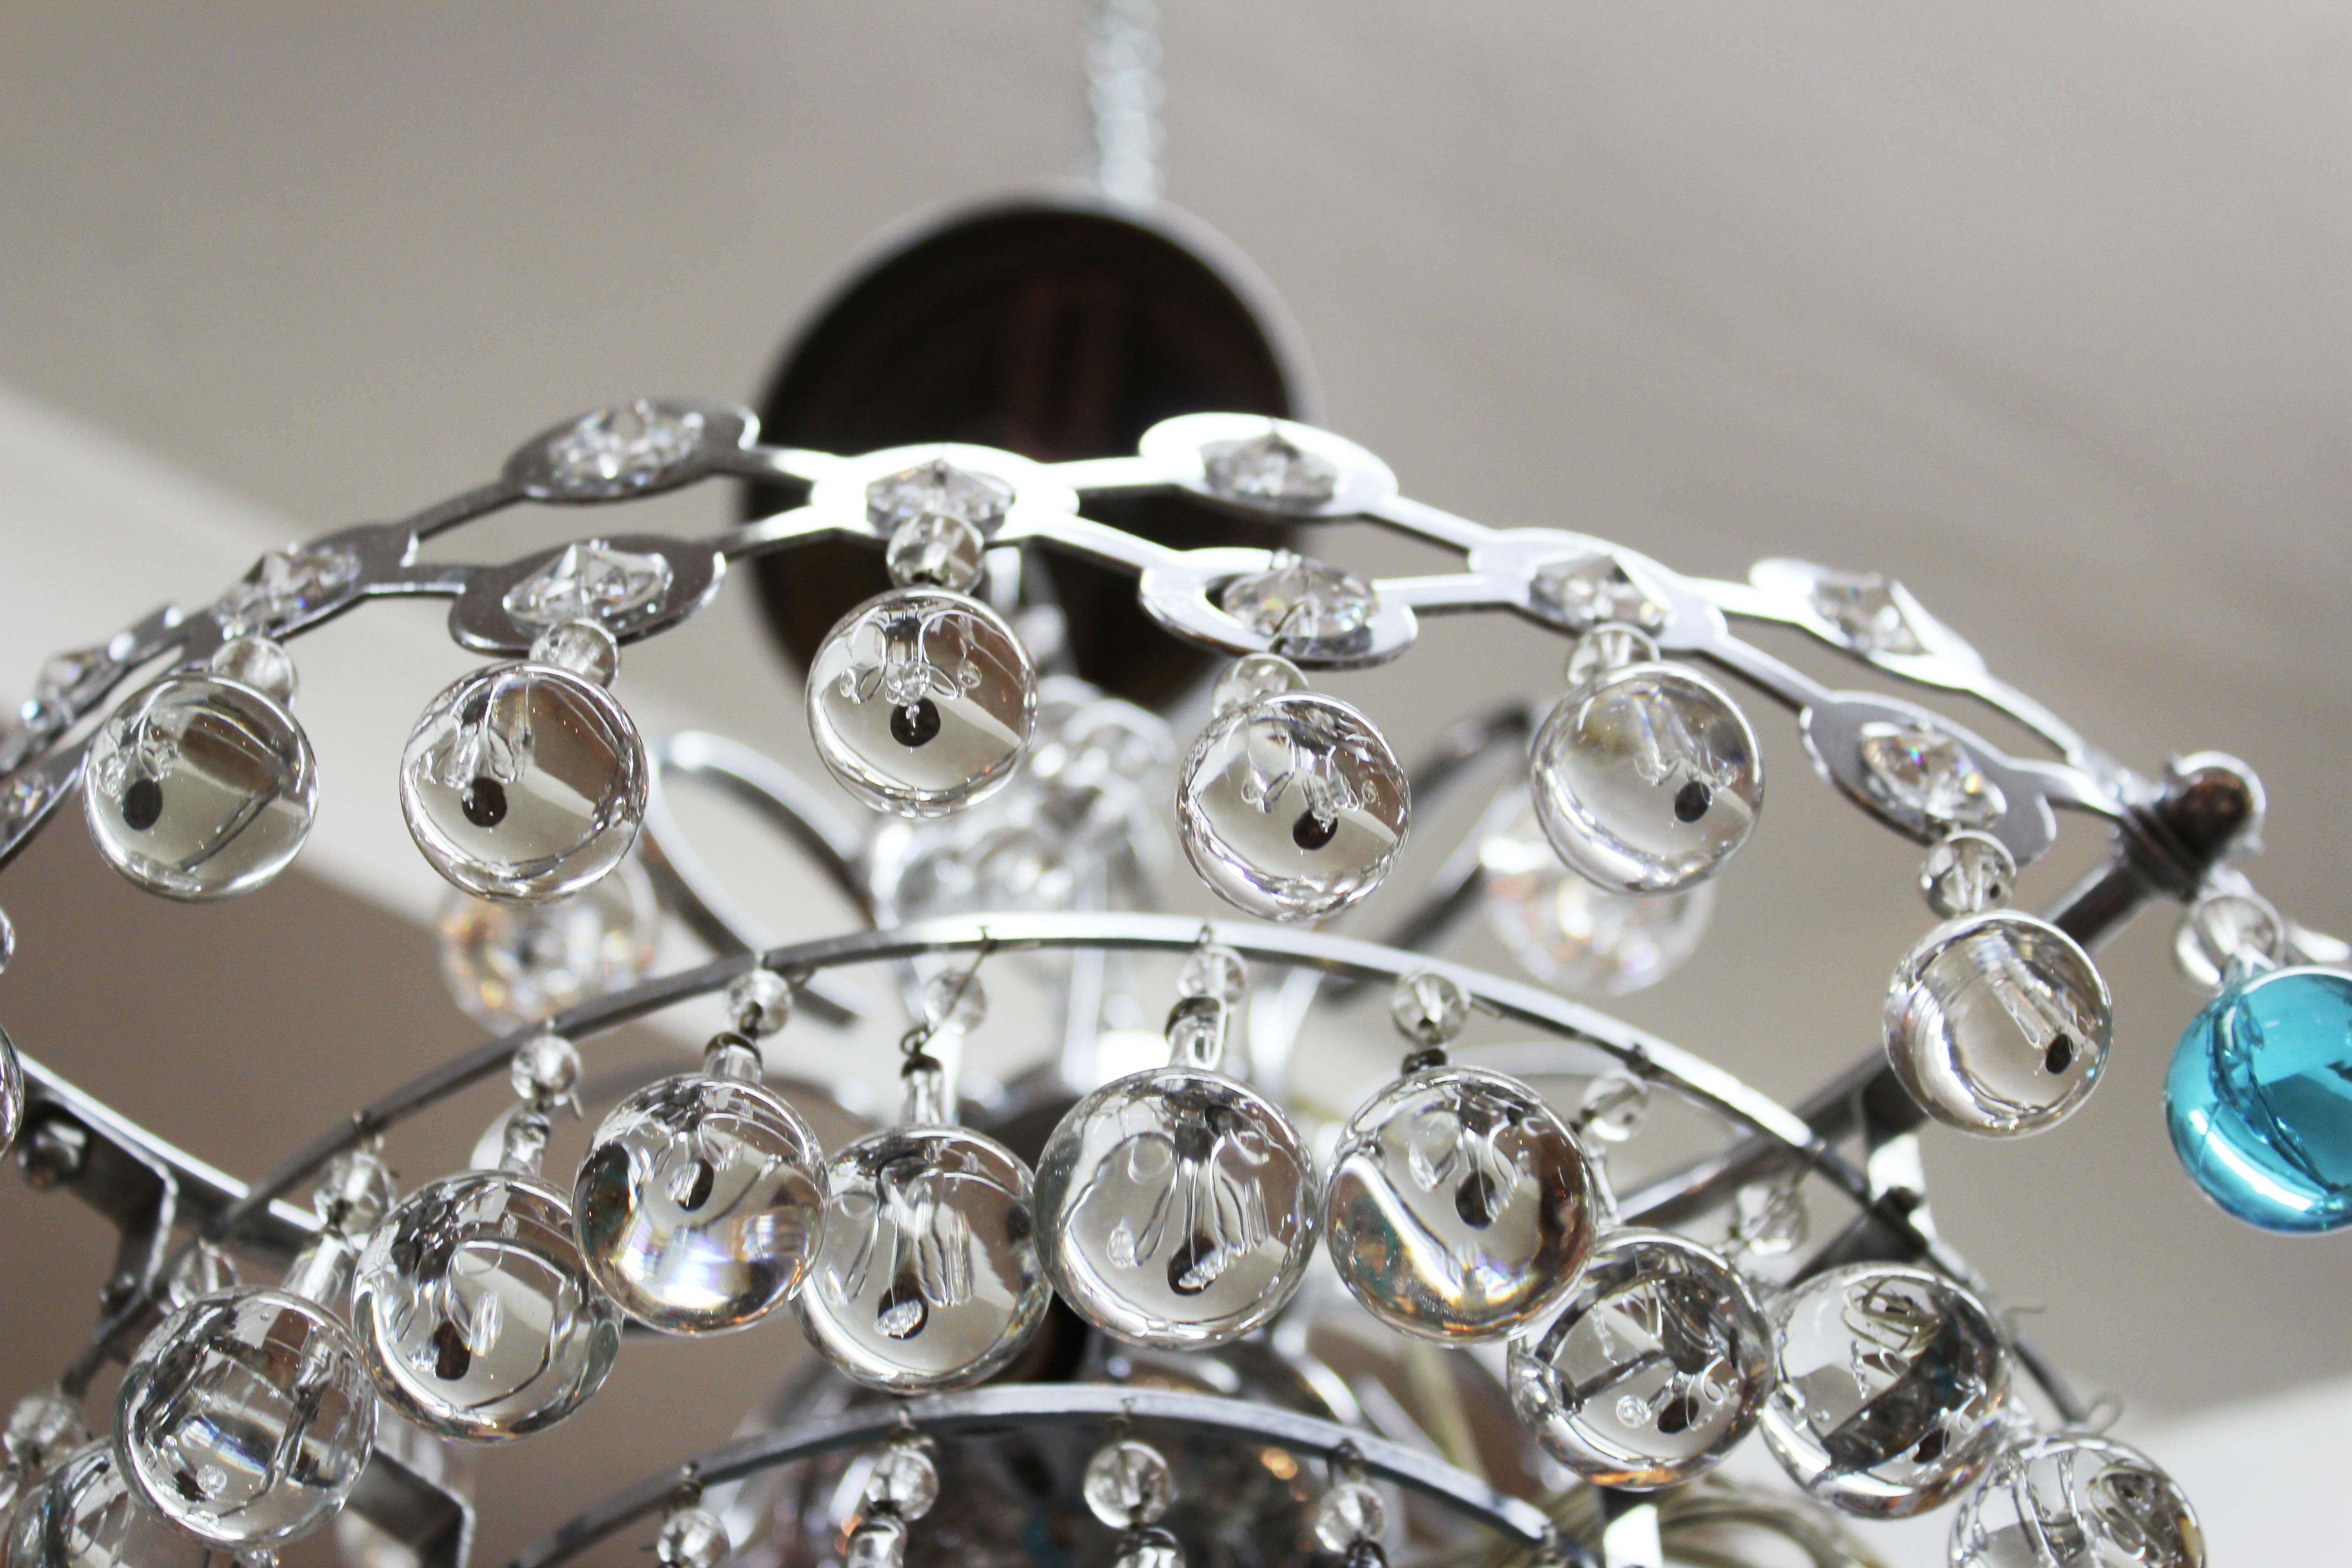 Italian Mid-Century Modern Chrome Chandelier with Clear & Turquoise Glass Balls 7